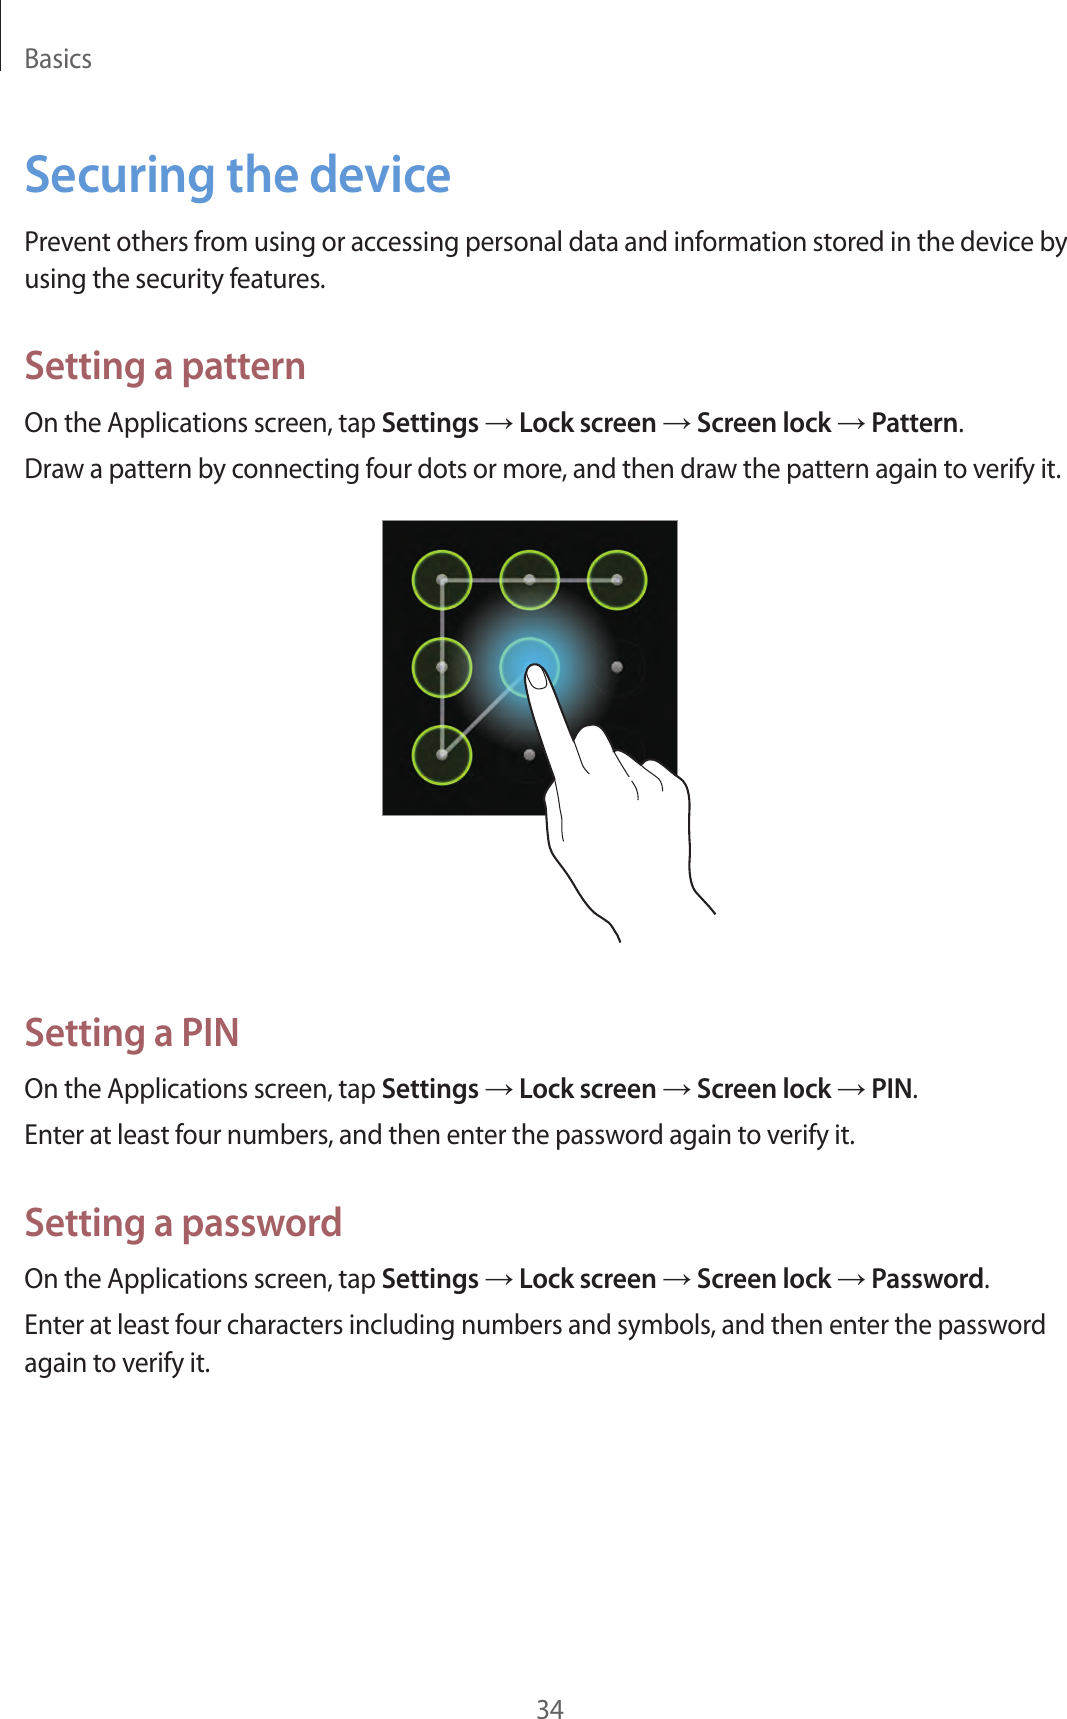 Basics34Securing the devicePrevent others from using or accessing personal data and information stored in the device by using the security features.Setting a patternOn the Applications screen, tap Settings → Lock screen → Screen lock → Pattern.Draw a pattern by connecting four dots or more, and then draw the pattern again to verify it.Setting a PINOn the Applications screen, tap Settings → Lock screen → Screen lock → PIN.Enter at least four numbers, and then enter the password again to verify it.Setting a passwordOn the Applications screen, tap Settings → Lock screen → Screen lock → Password.Enter at least four characters including numbers and symbols, and then enter the password again to verify it.